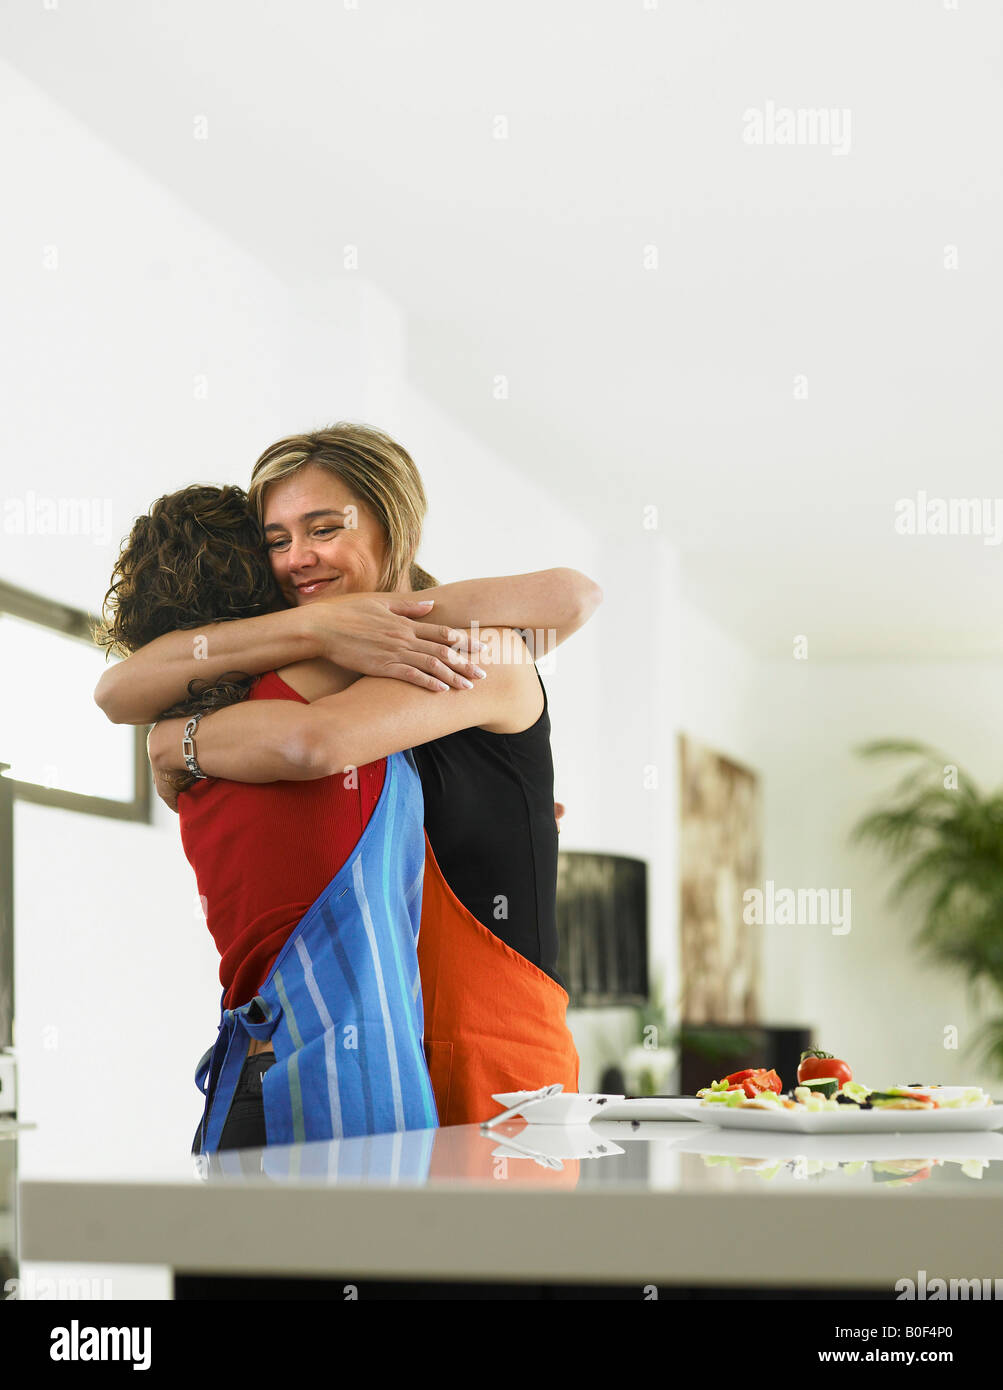 Mother and daughter embracing Stock Photo